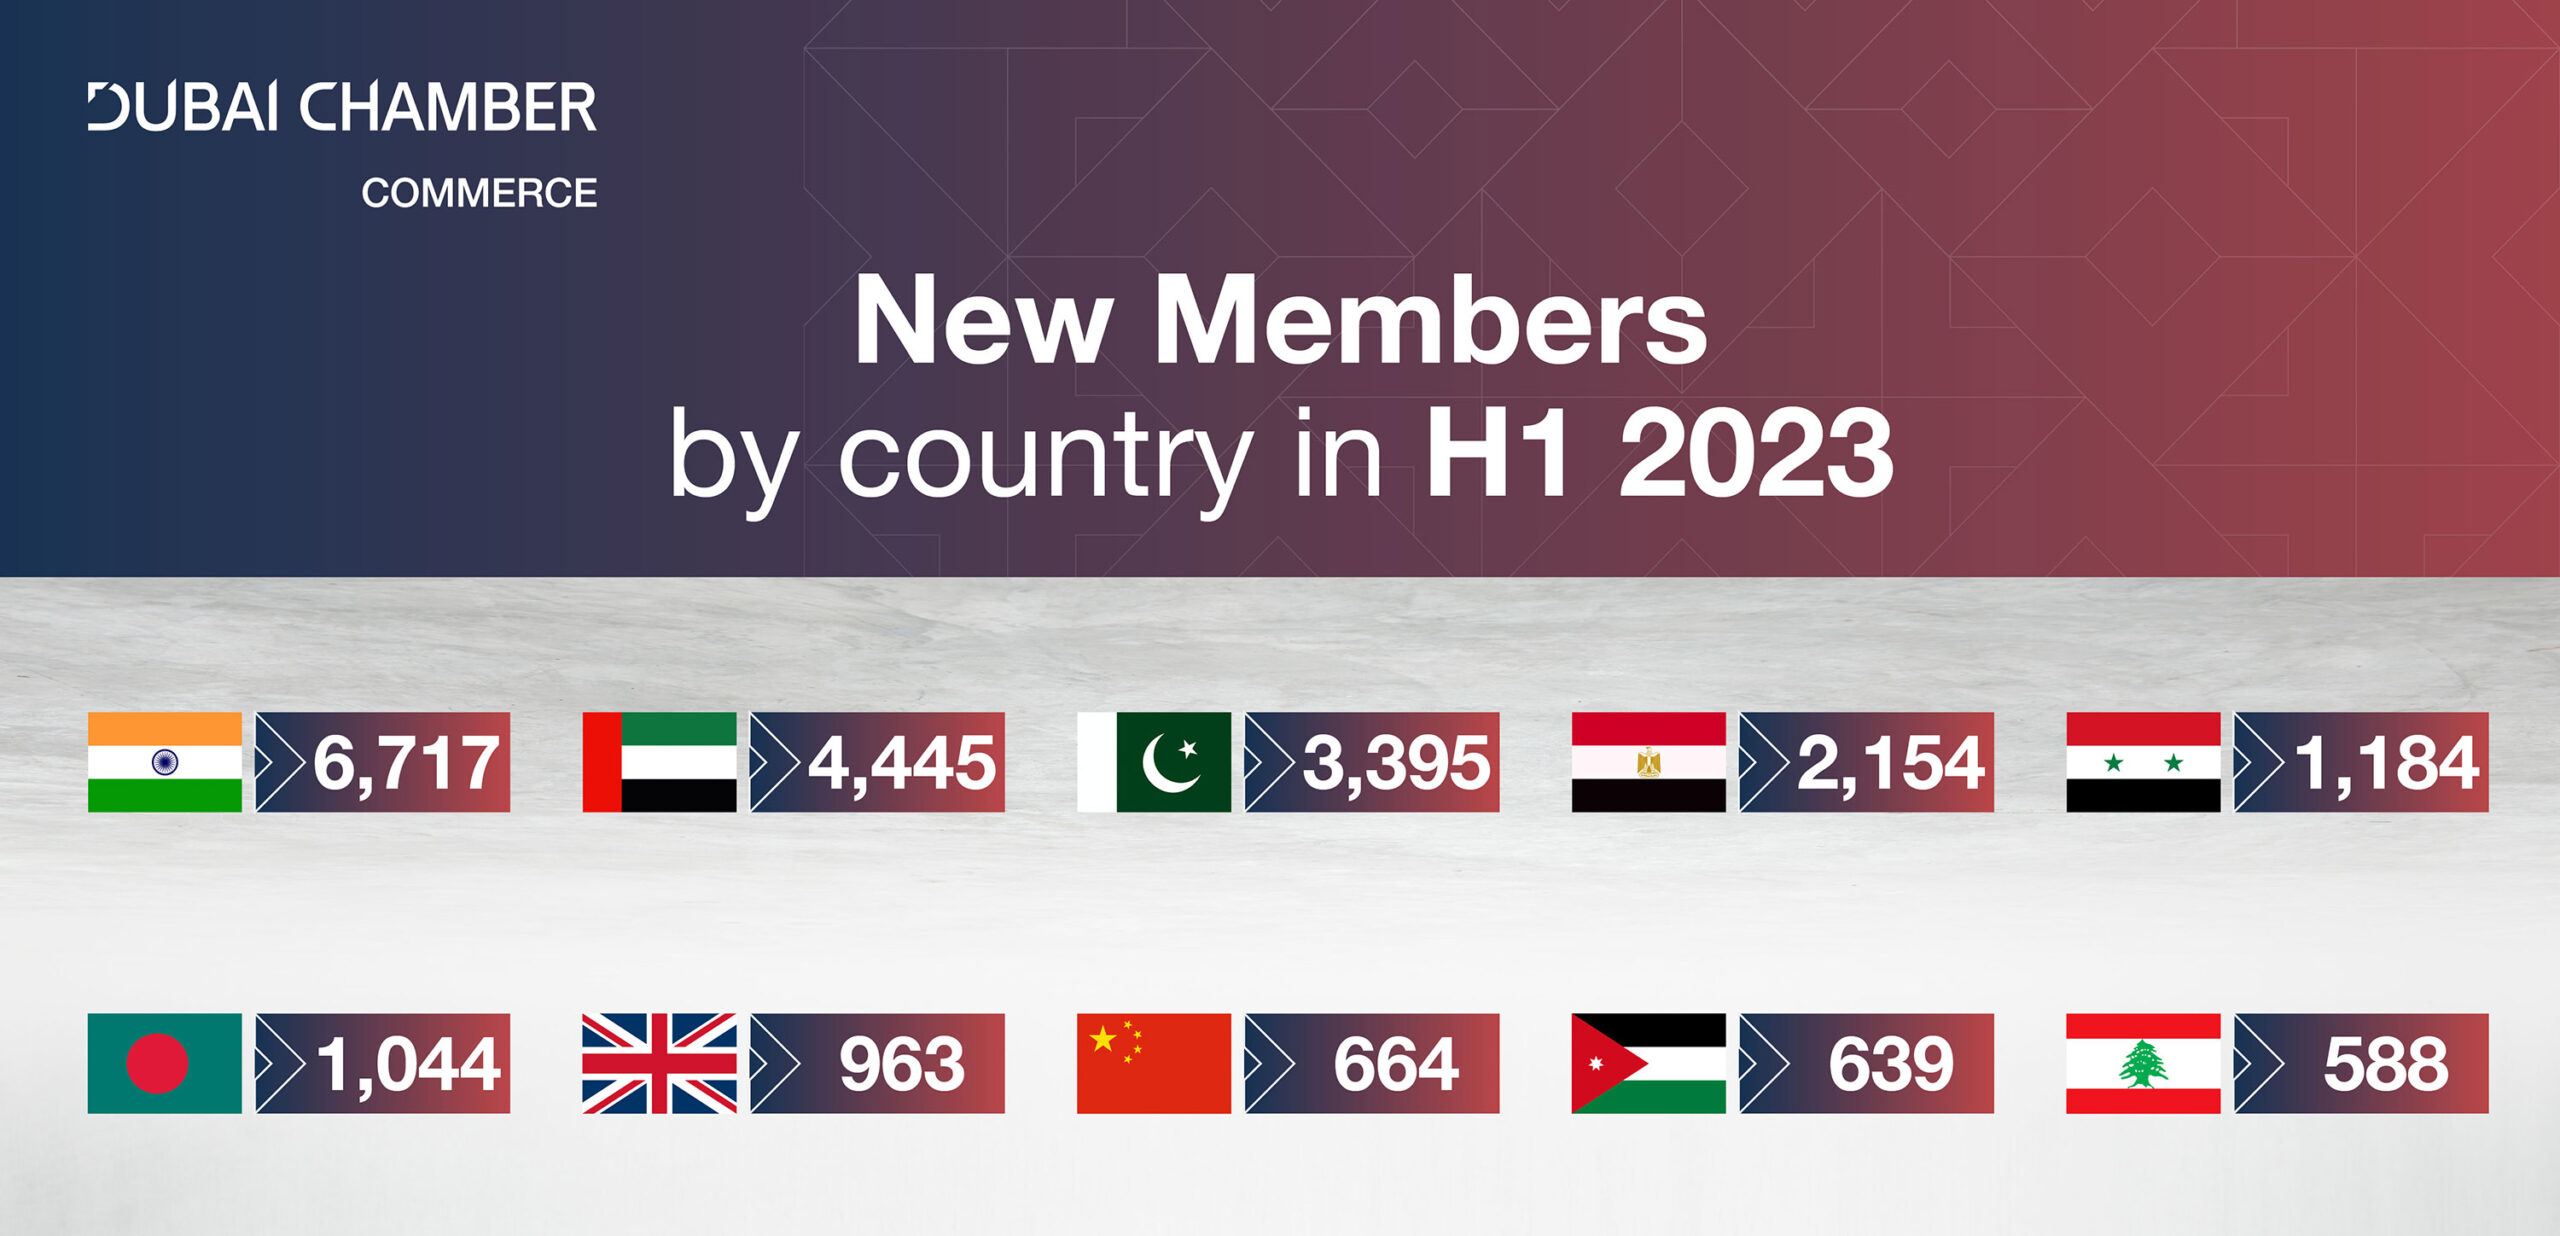 India tops list of new Dubai Chamber of Commerce members during H1 2023 with 6,717 companies, Egypt leads Arab world behind UAE with 2,154